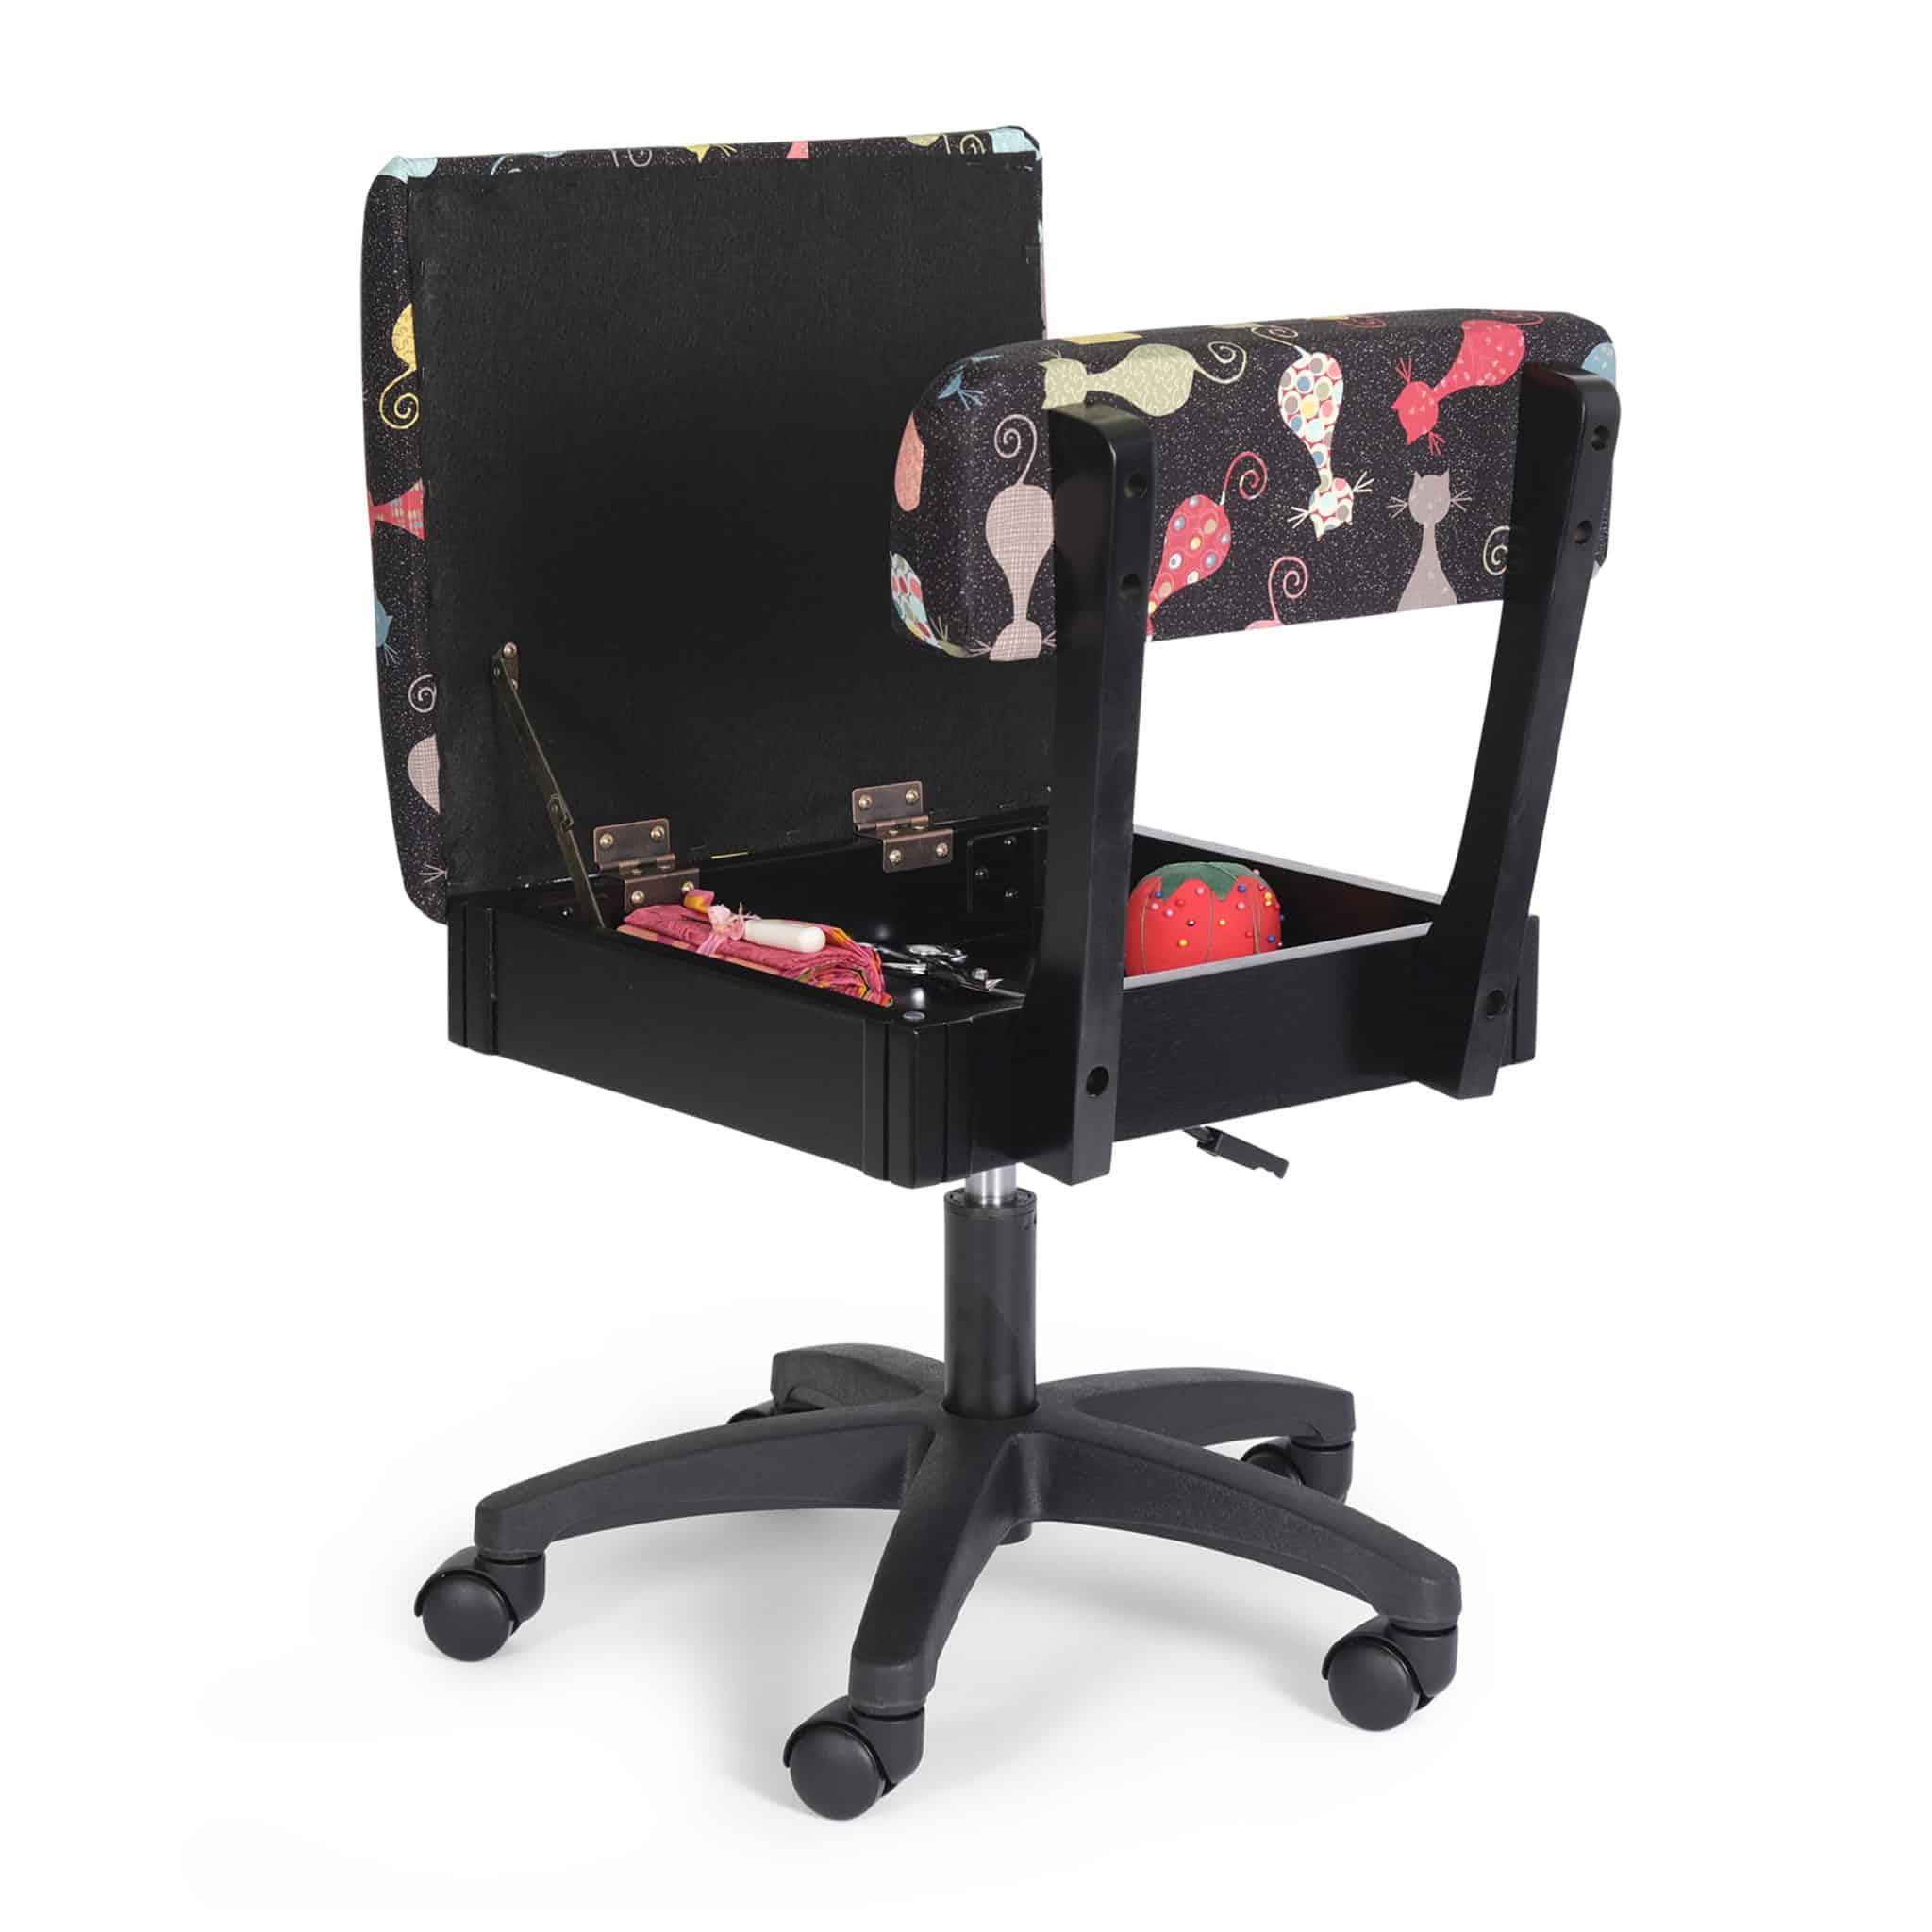 The Cat's Meow Hydraulic Sewing Chair's seat turns into a secret storage compartment. This ergonomic chair is also perfect for stashing notions or an emergency chocolate bar.